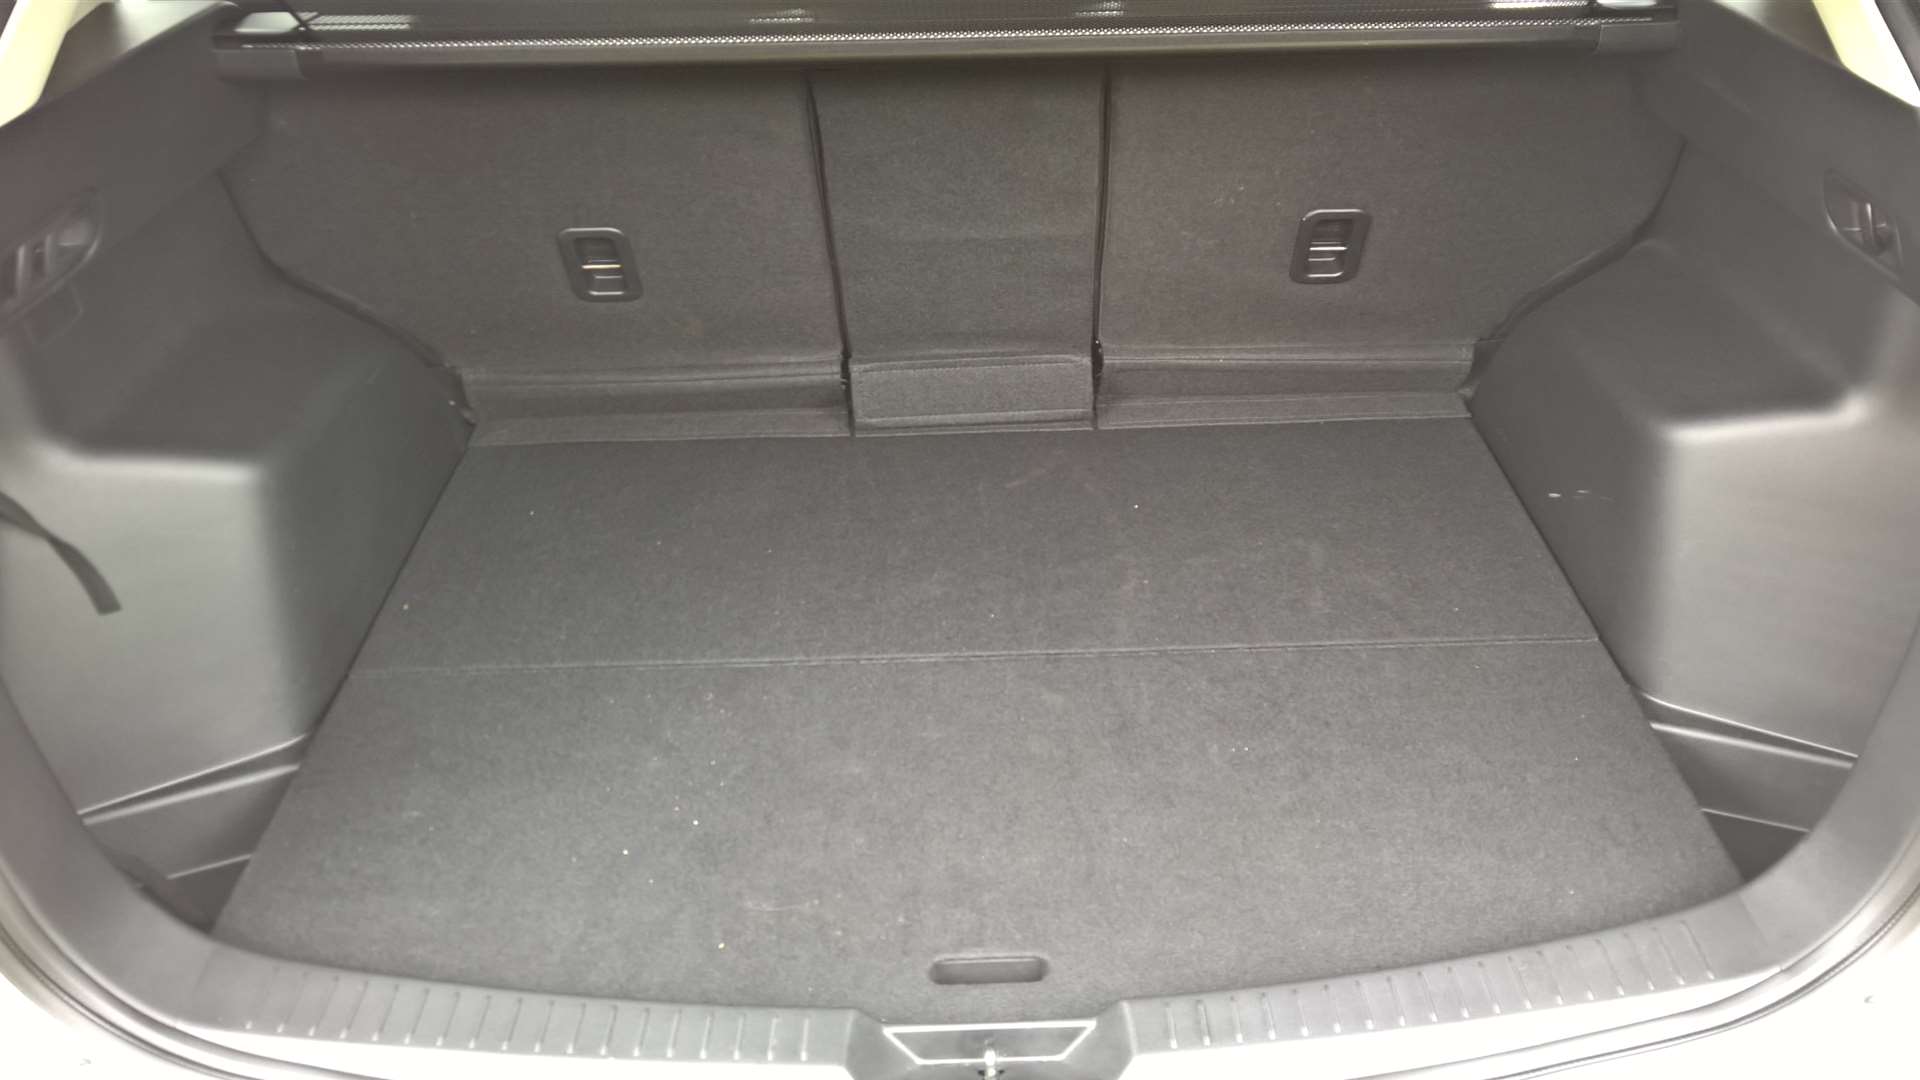 The boot is a good size but you don't get a flat floor with the rear seats stowed